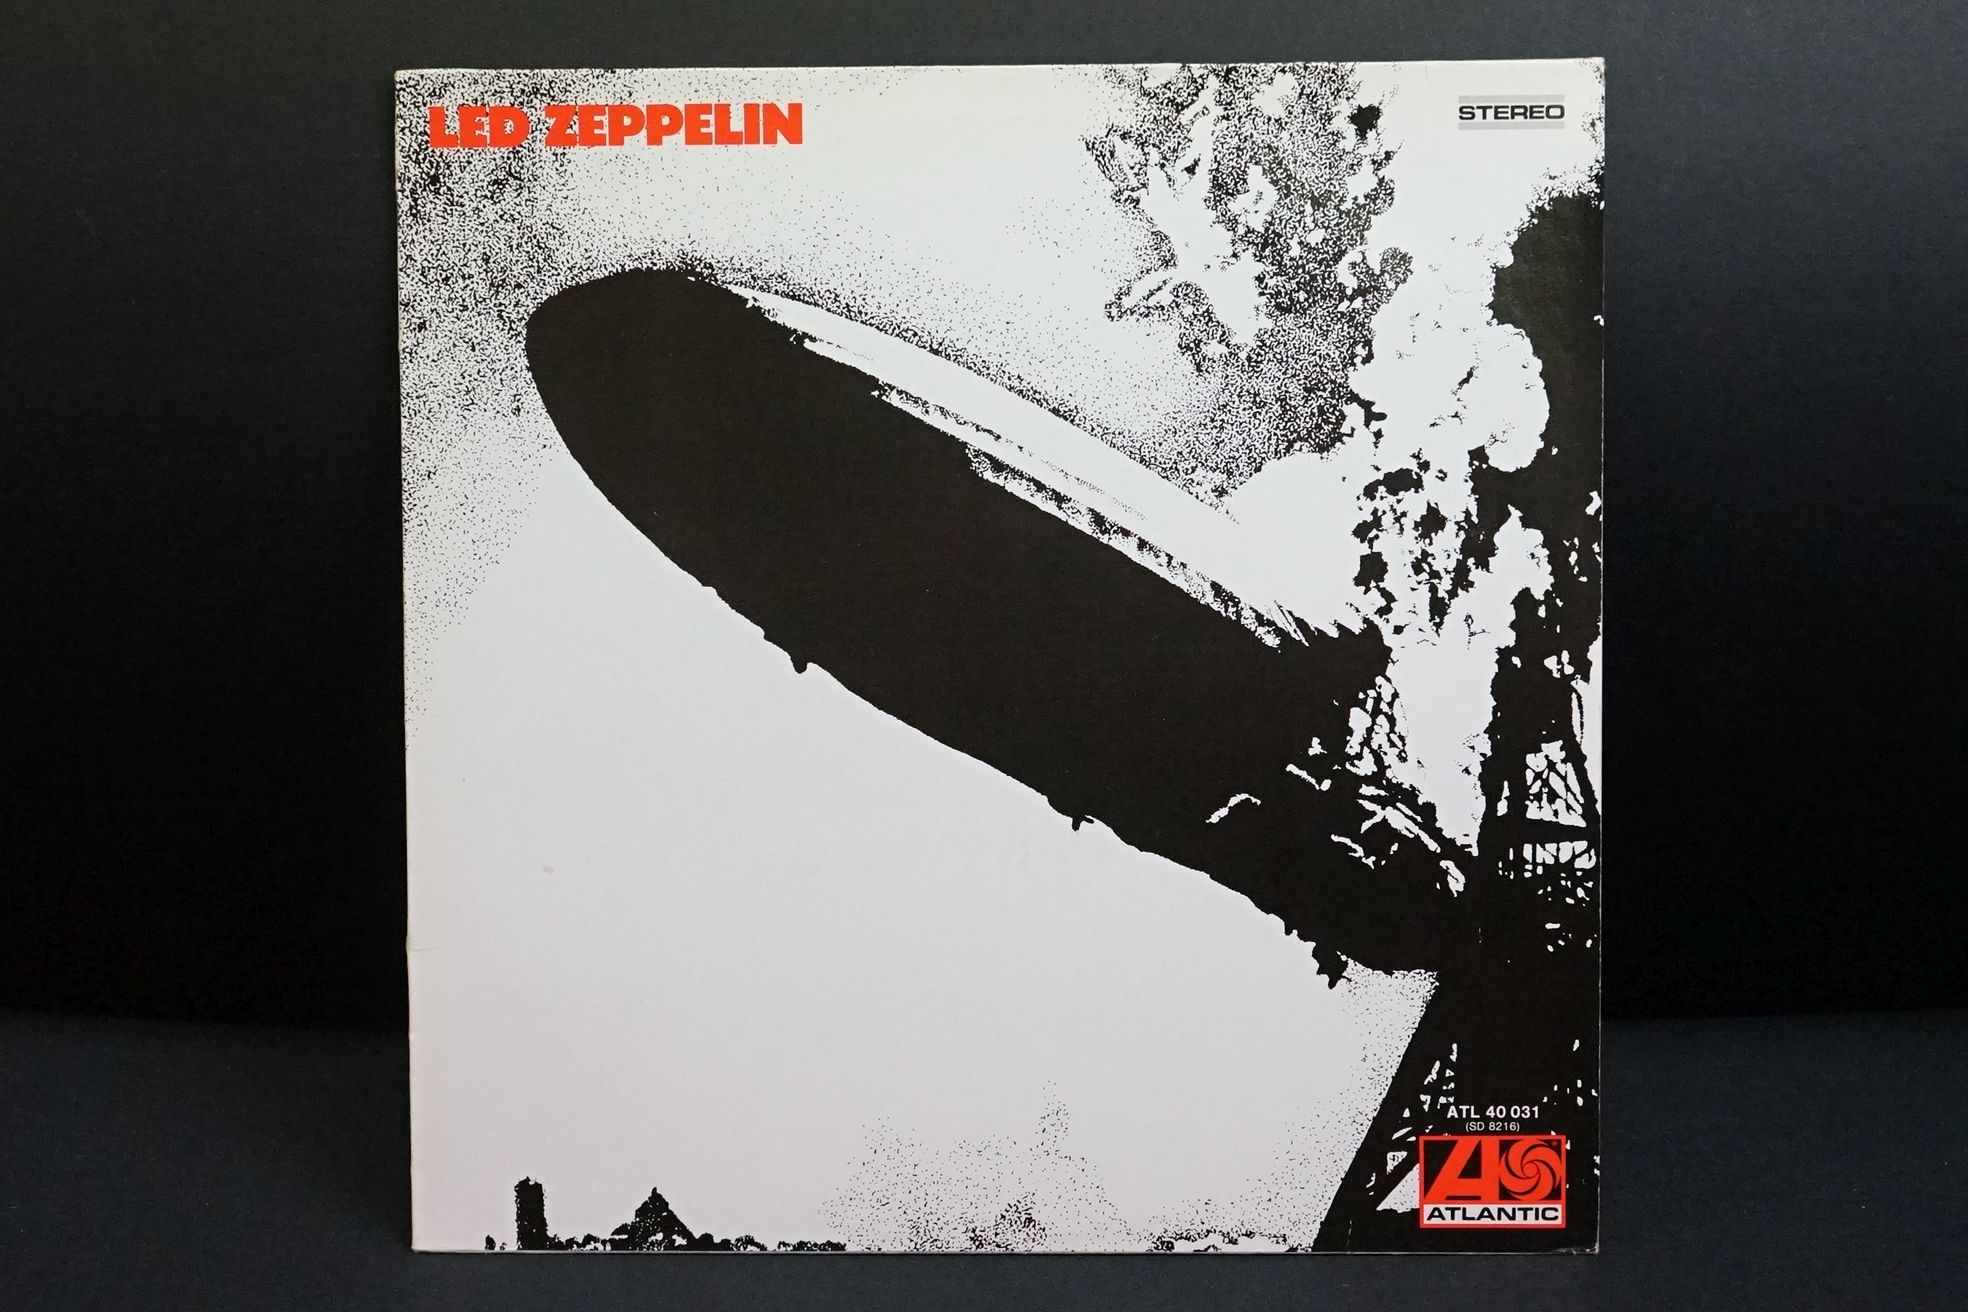 Vinyl - 3 Led Zeppelin LPs to include One (ATL 40031) green and orange Atlantic labels German press, - Image 7 of 18